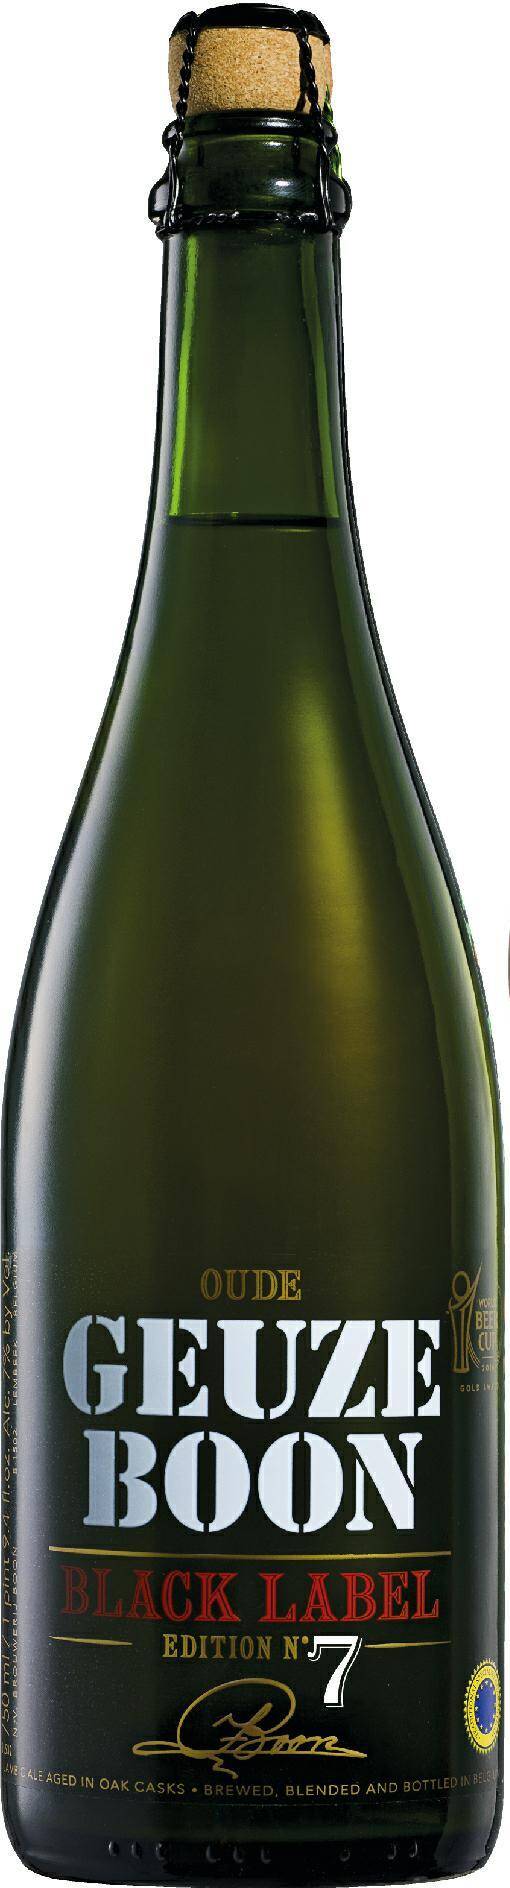 Boon Oude Gueuze Black Label N*7 750 ml